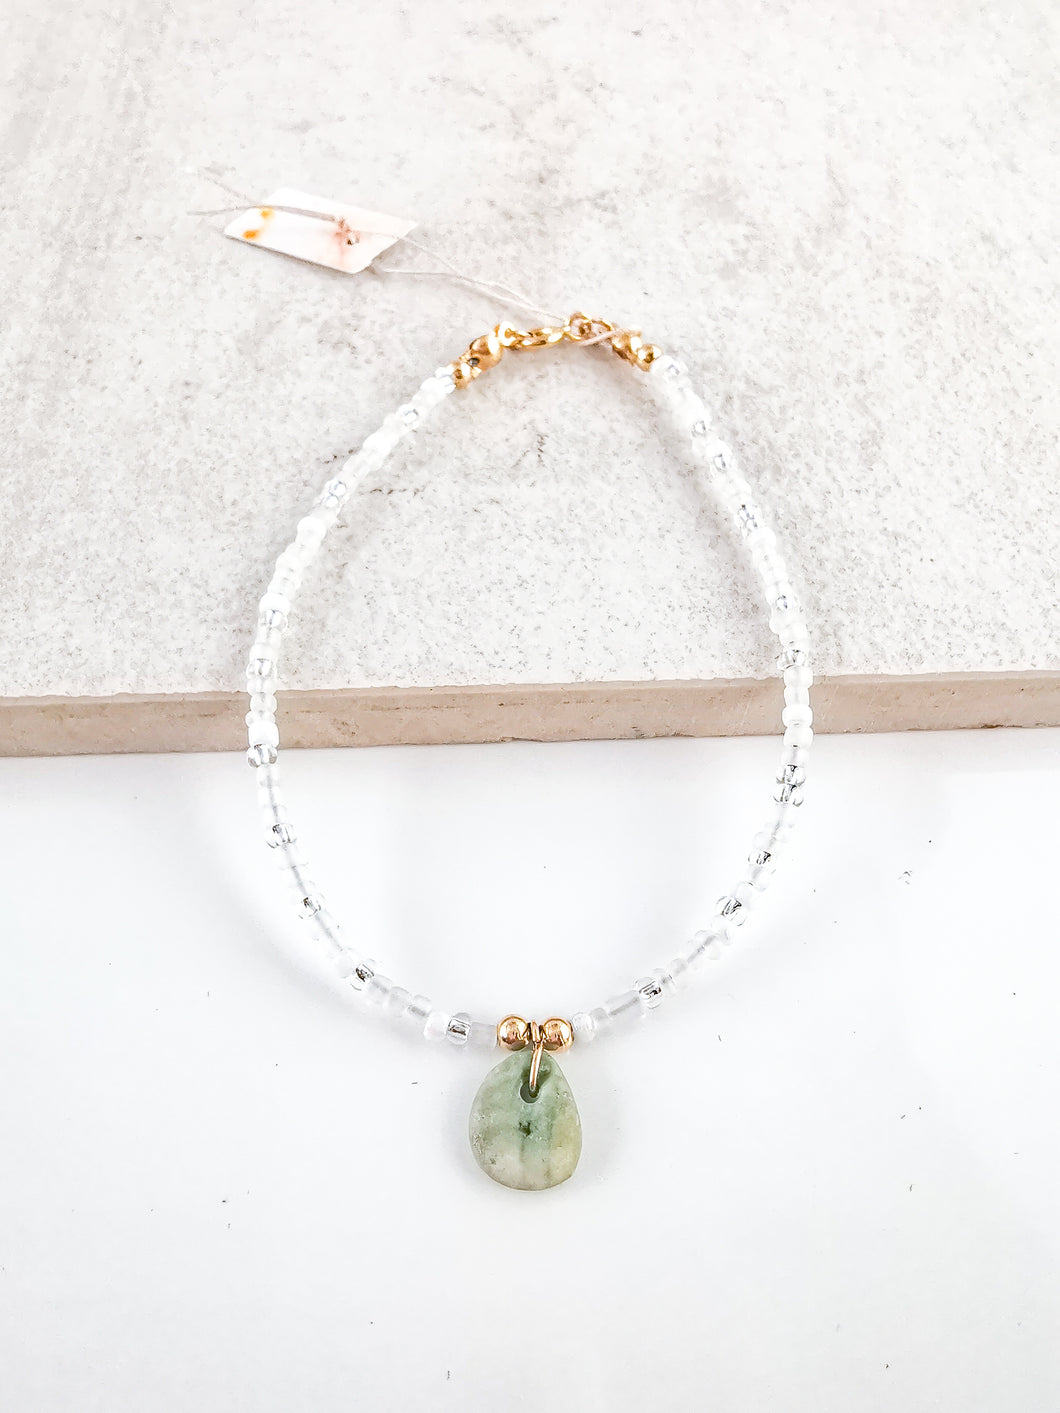 Glass bead bracelet with a green stone pendant